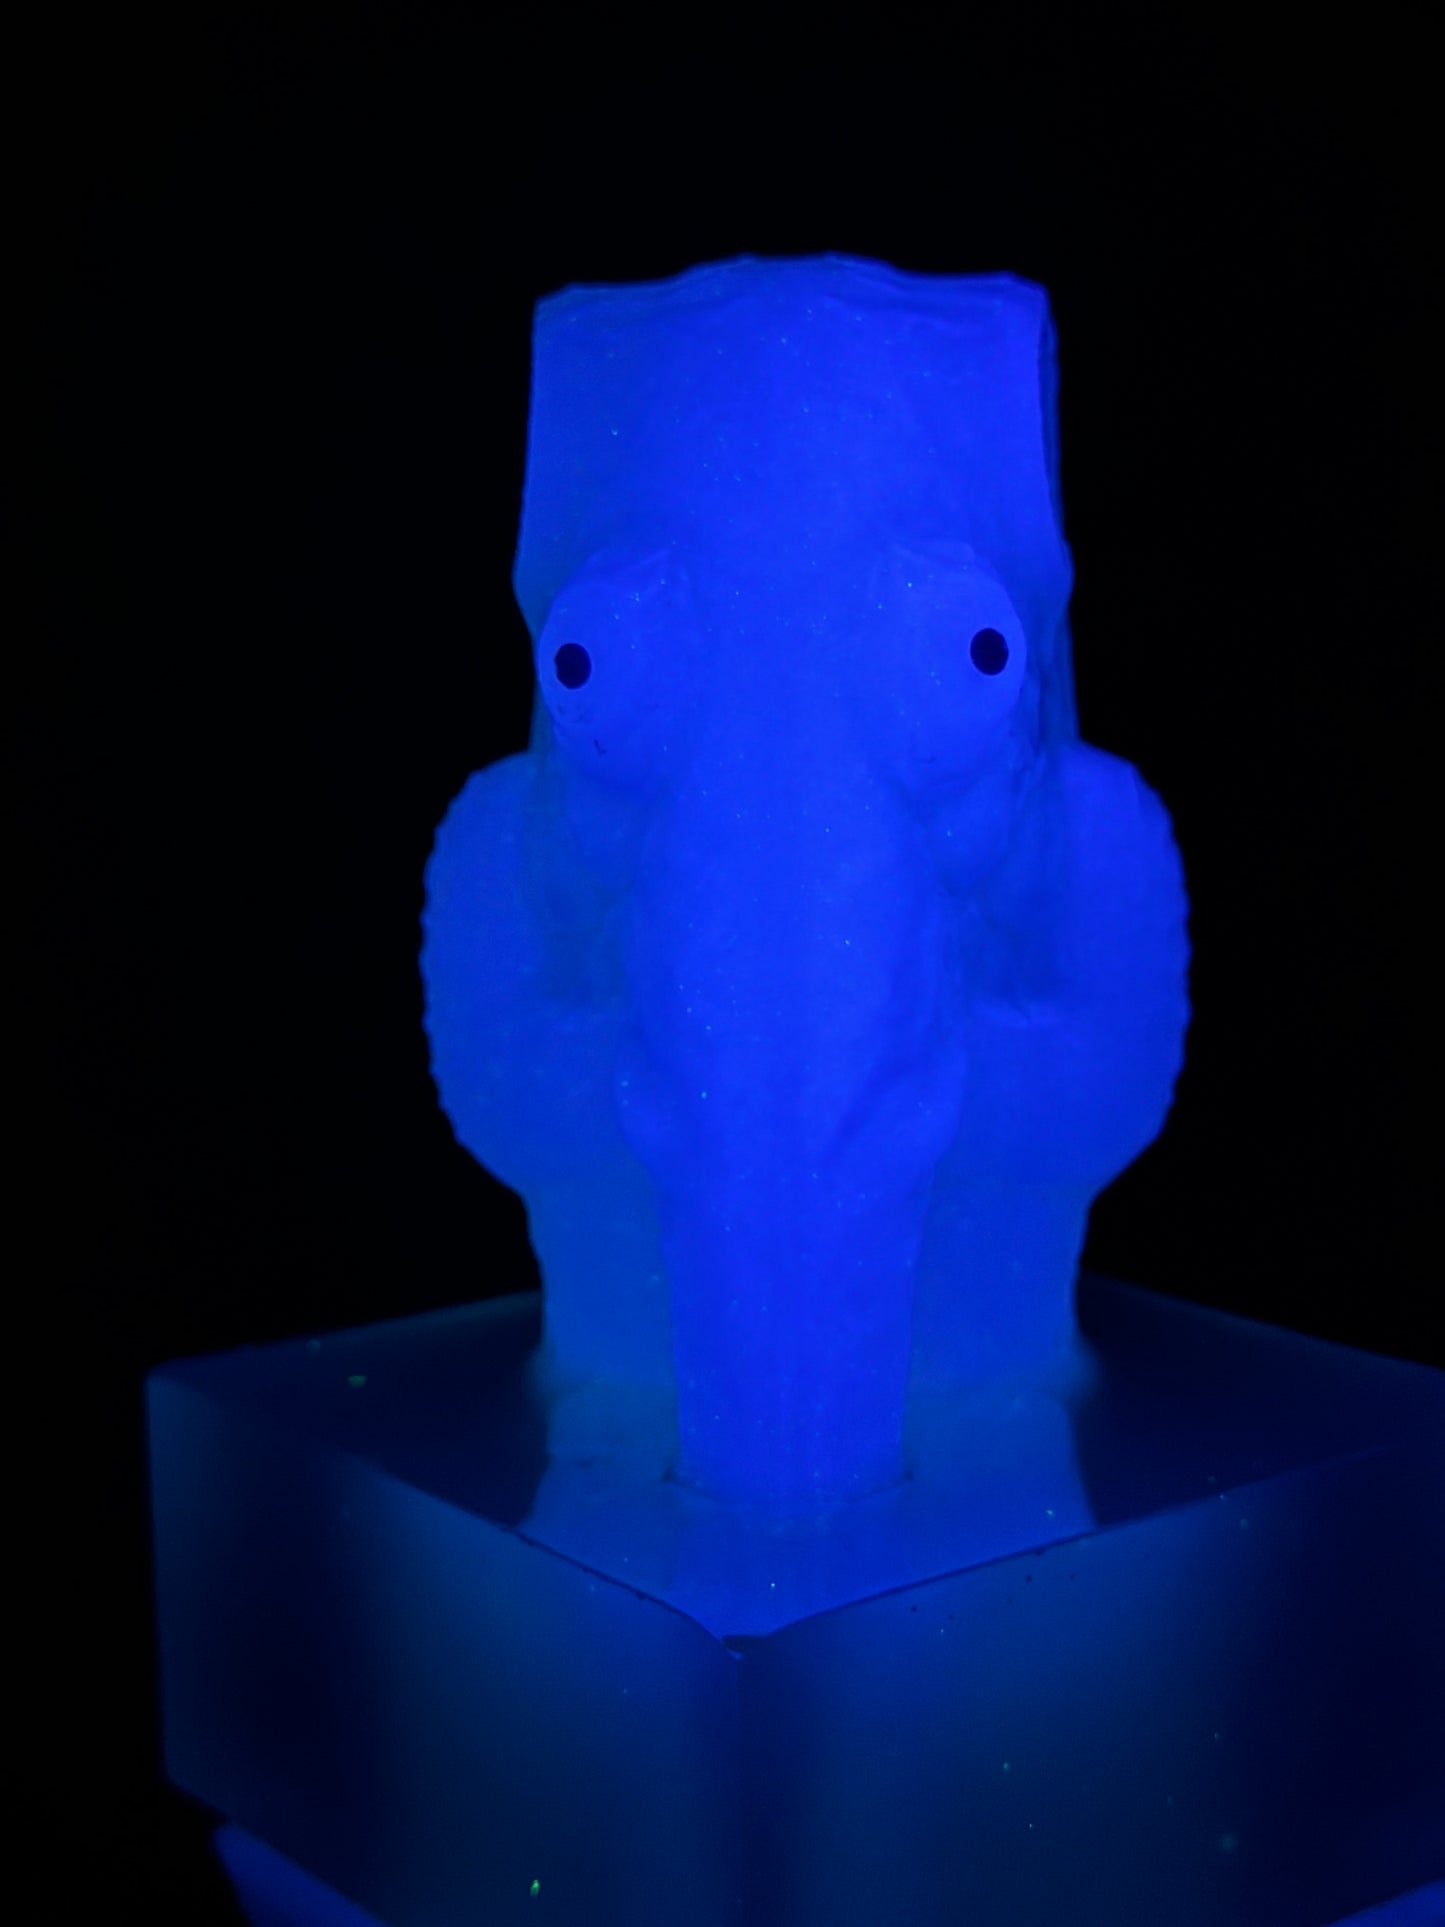 After Elephant: Ghost in the Cube